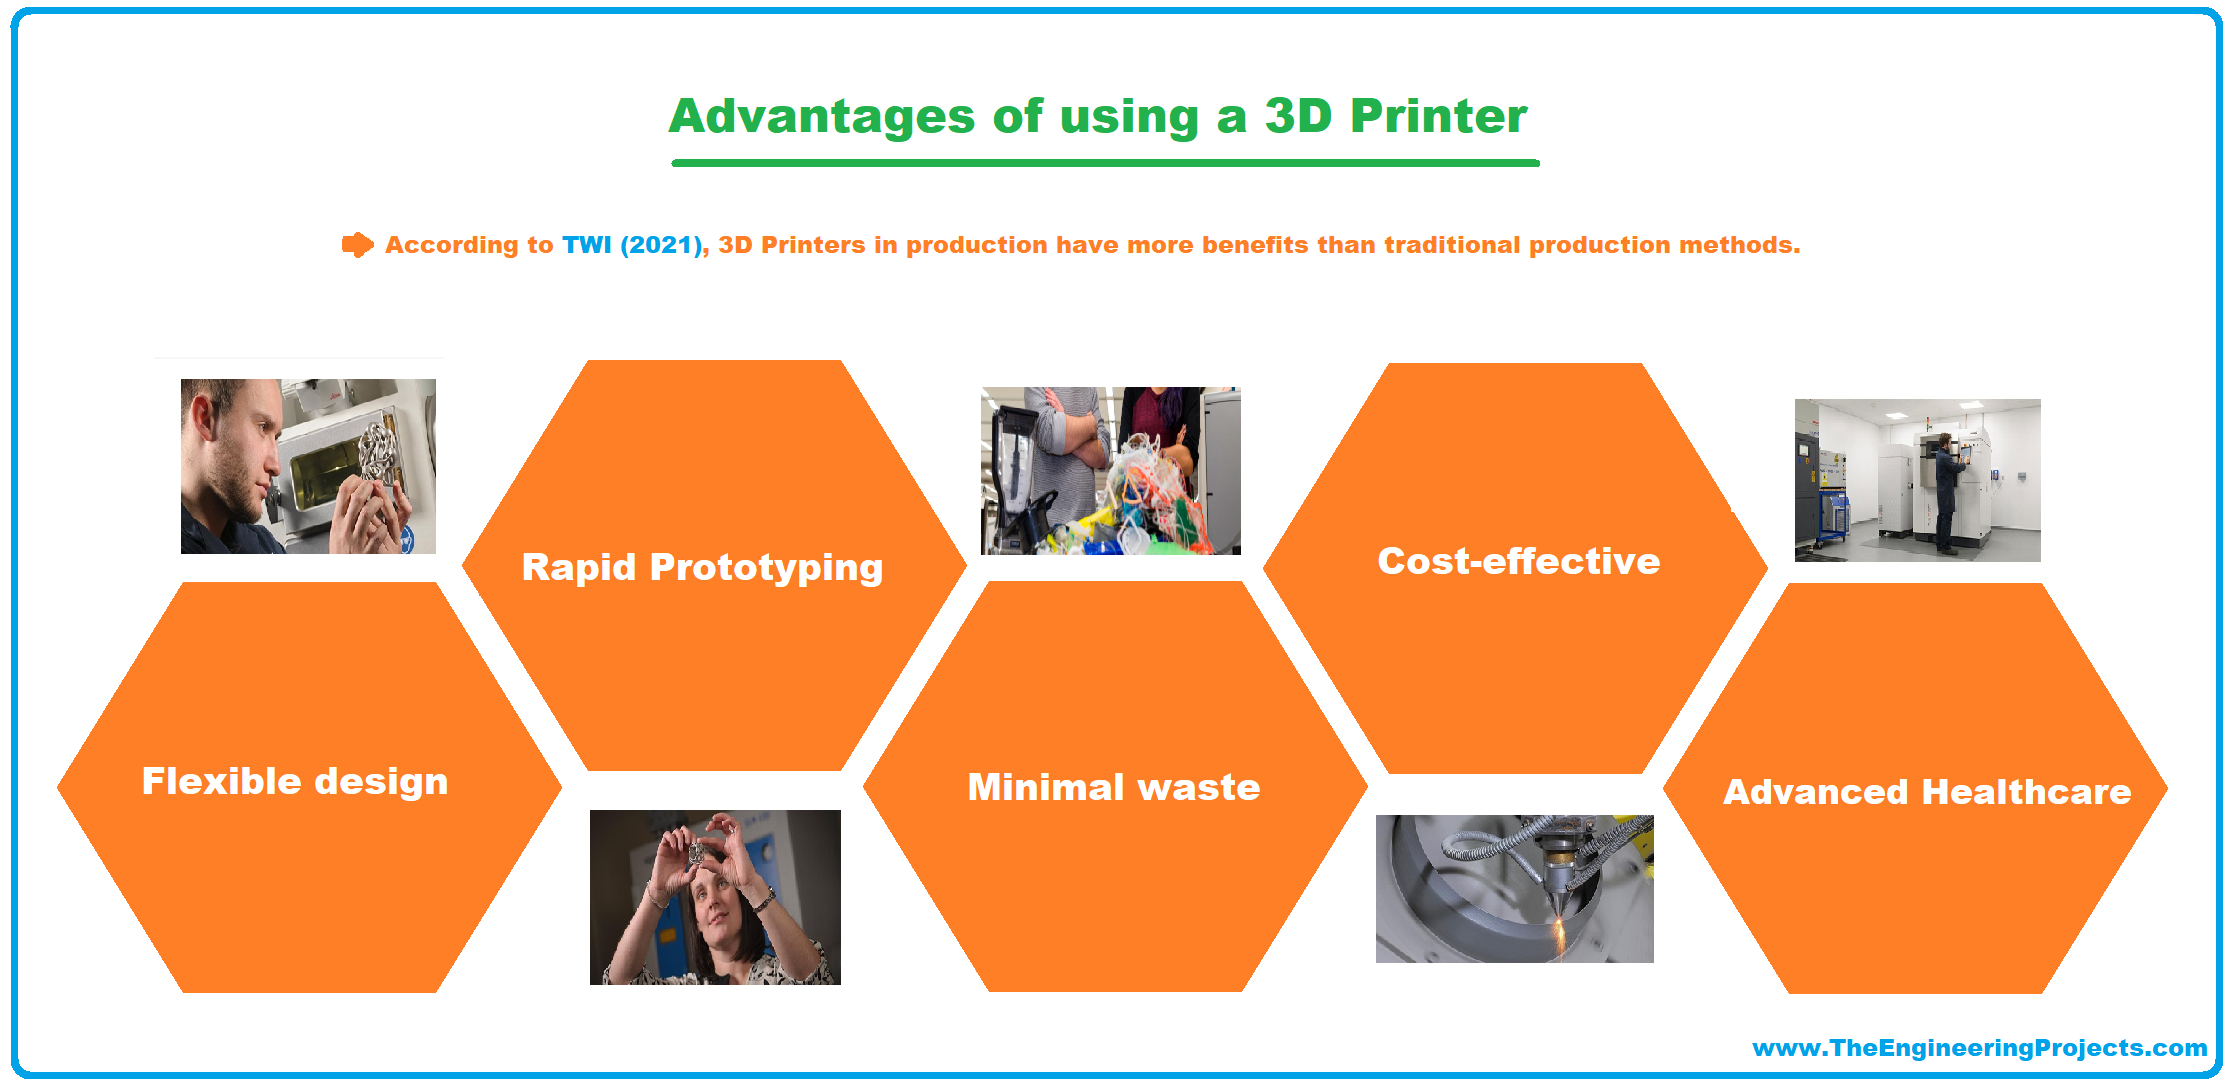 3D Printer, what is 3D Printer, working of 3D Printer, definition of 3D Printer, advantages of 3D Printer, disadvantages of 3D Printer, applications of 3D Printer, price of 3D Printer